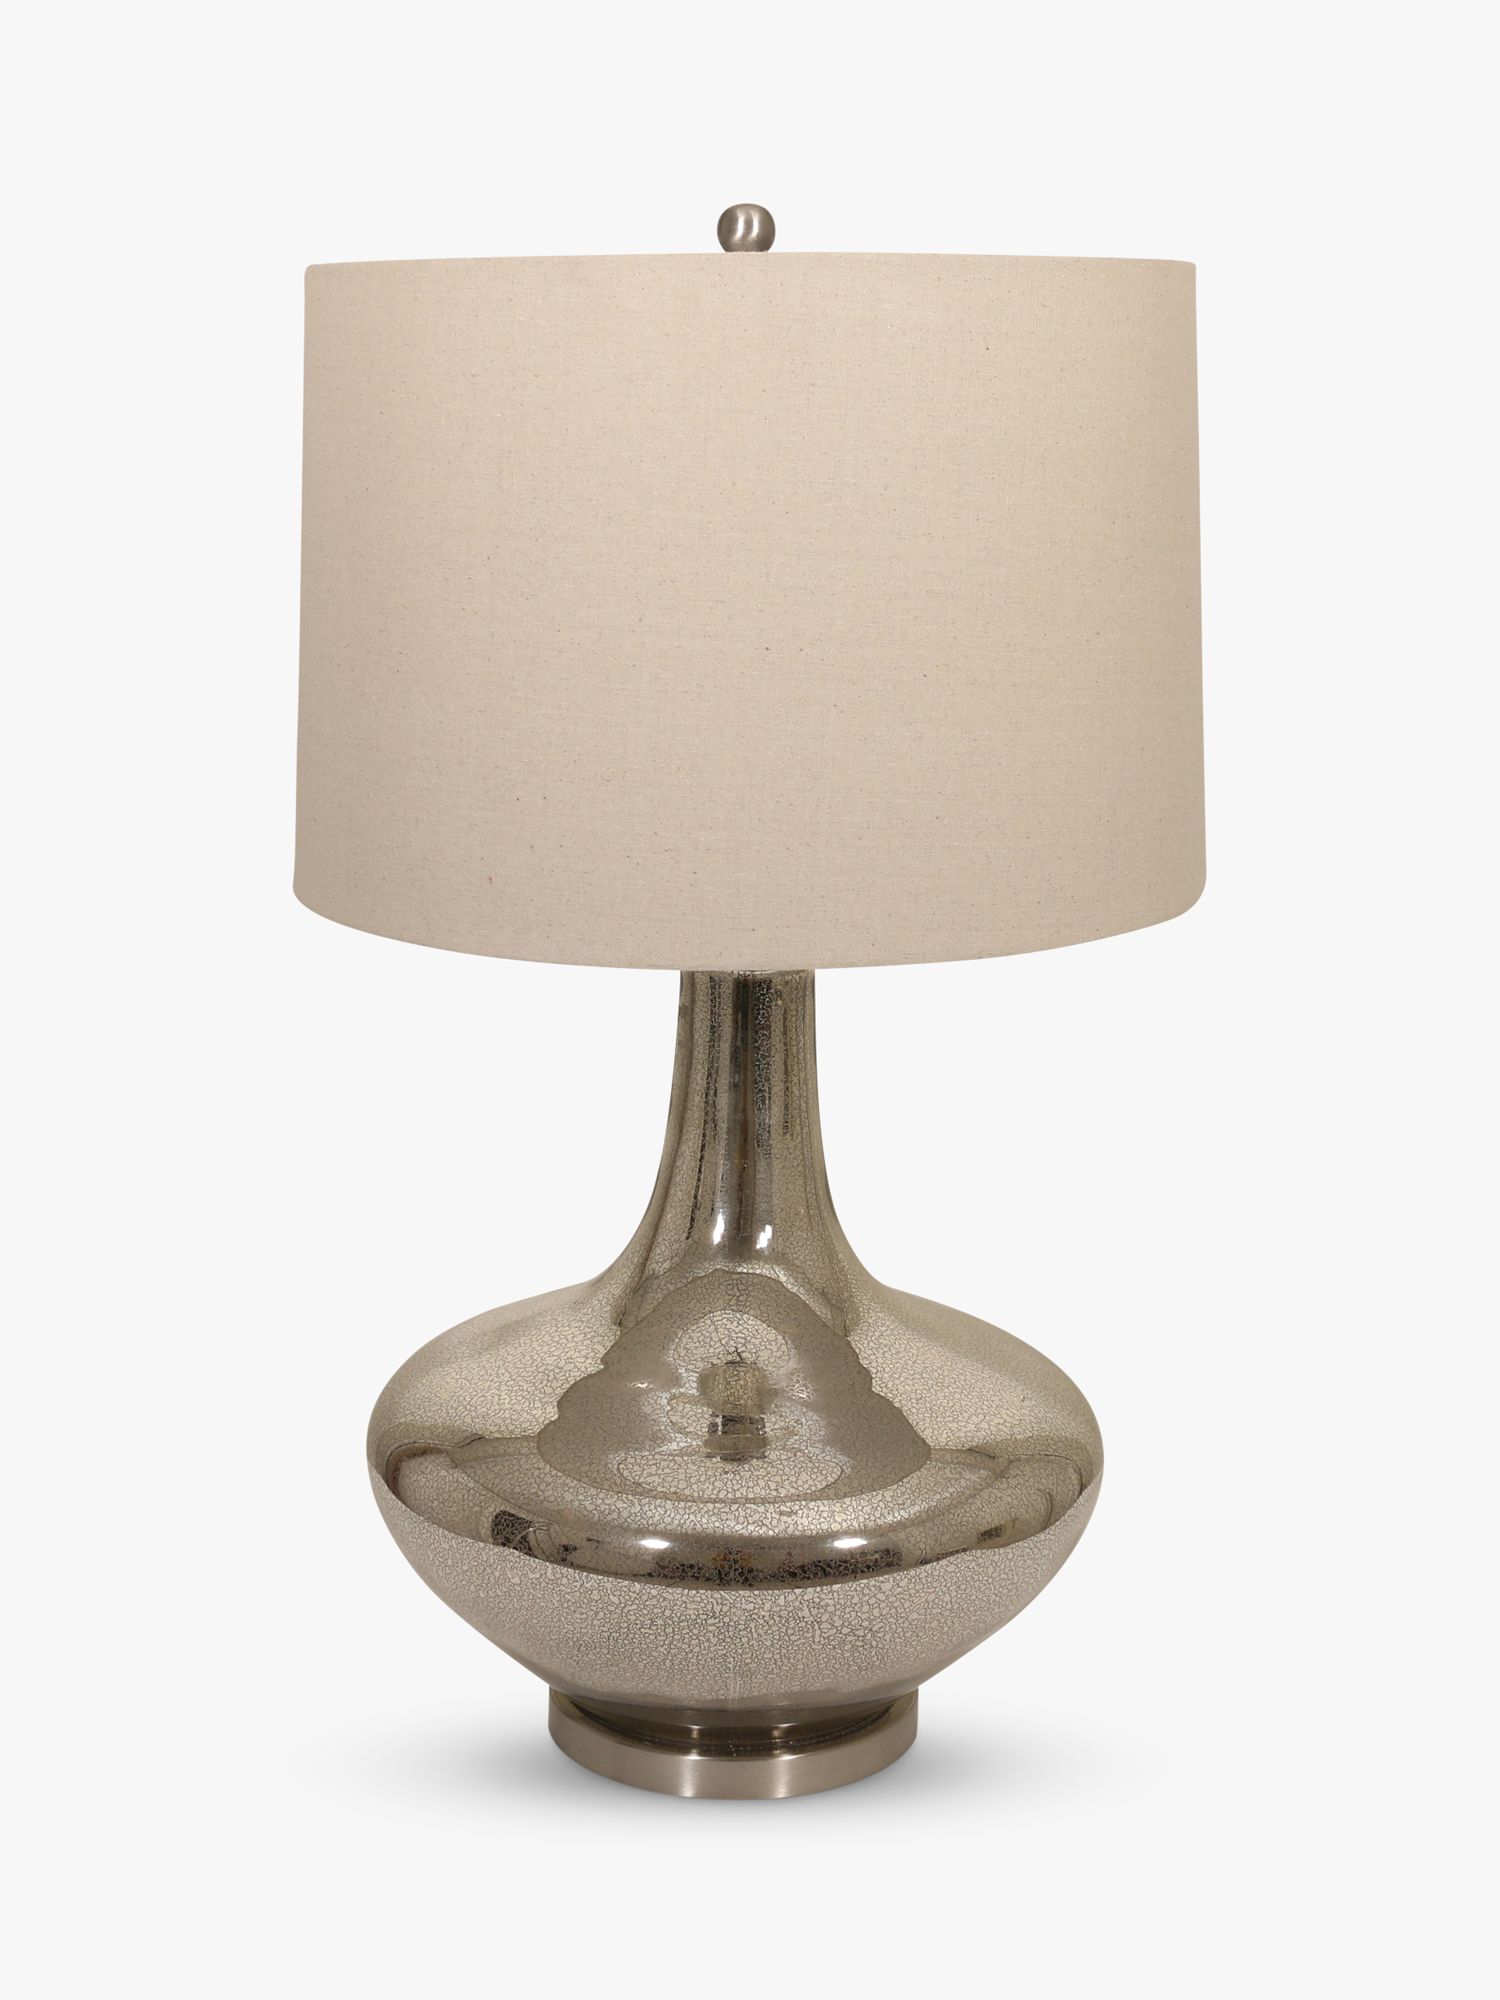 Photo of One.world clifton crackle glaze base linen shade table lamp nickel